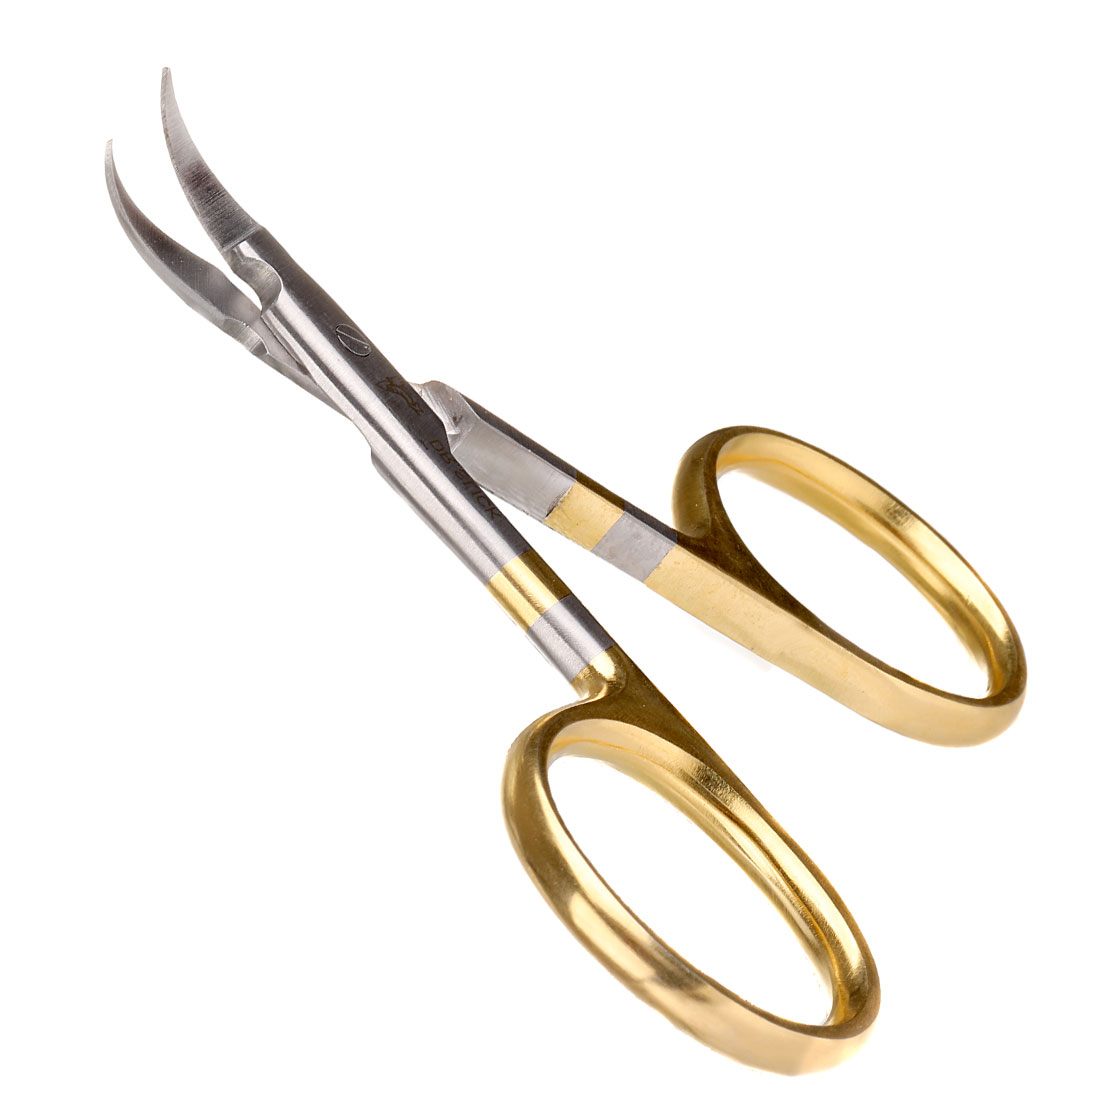 Dr. Slick Fly Tying Arrow Scissors - Curved Blade – Fly Artist